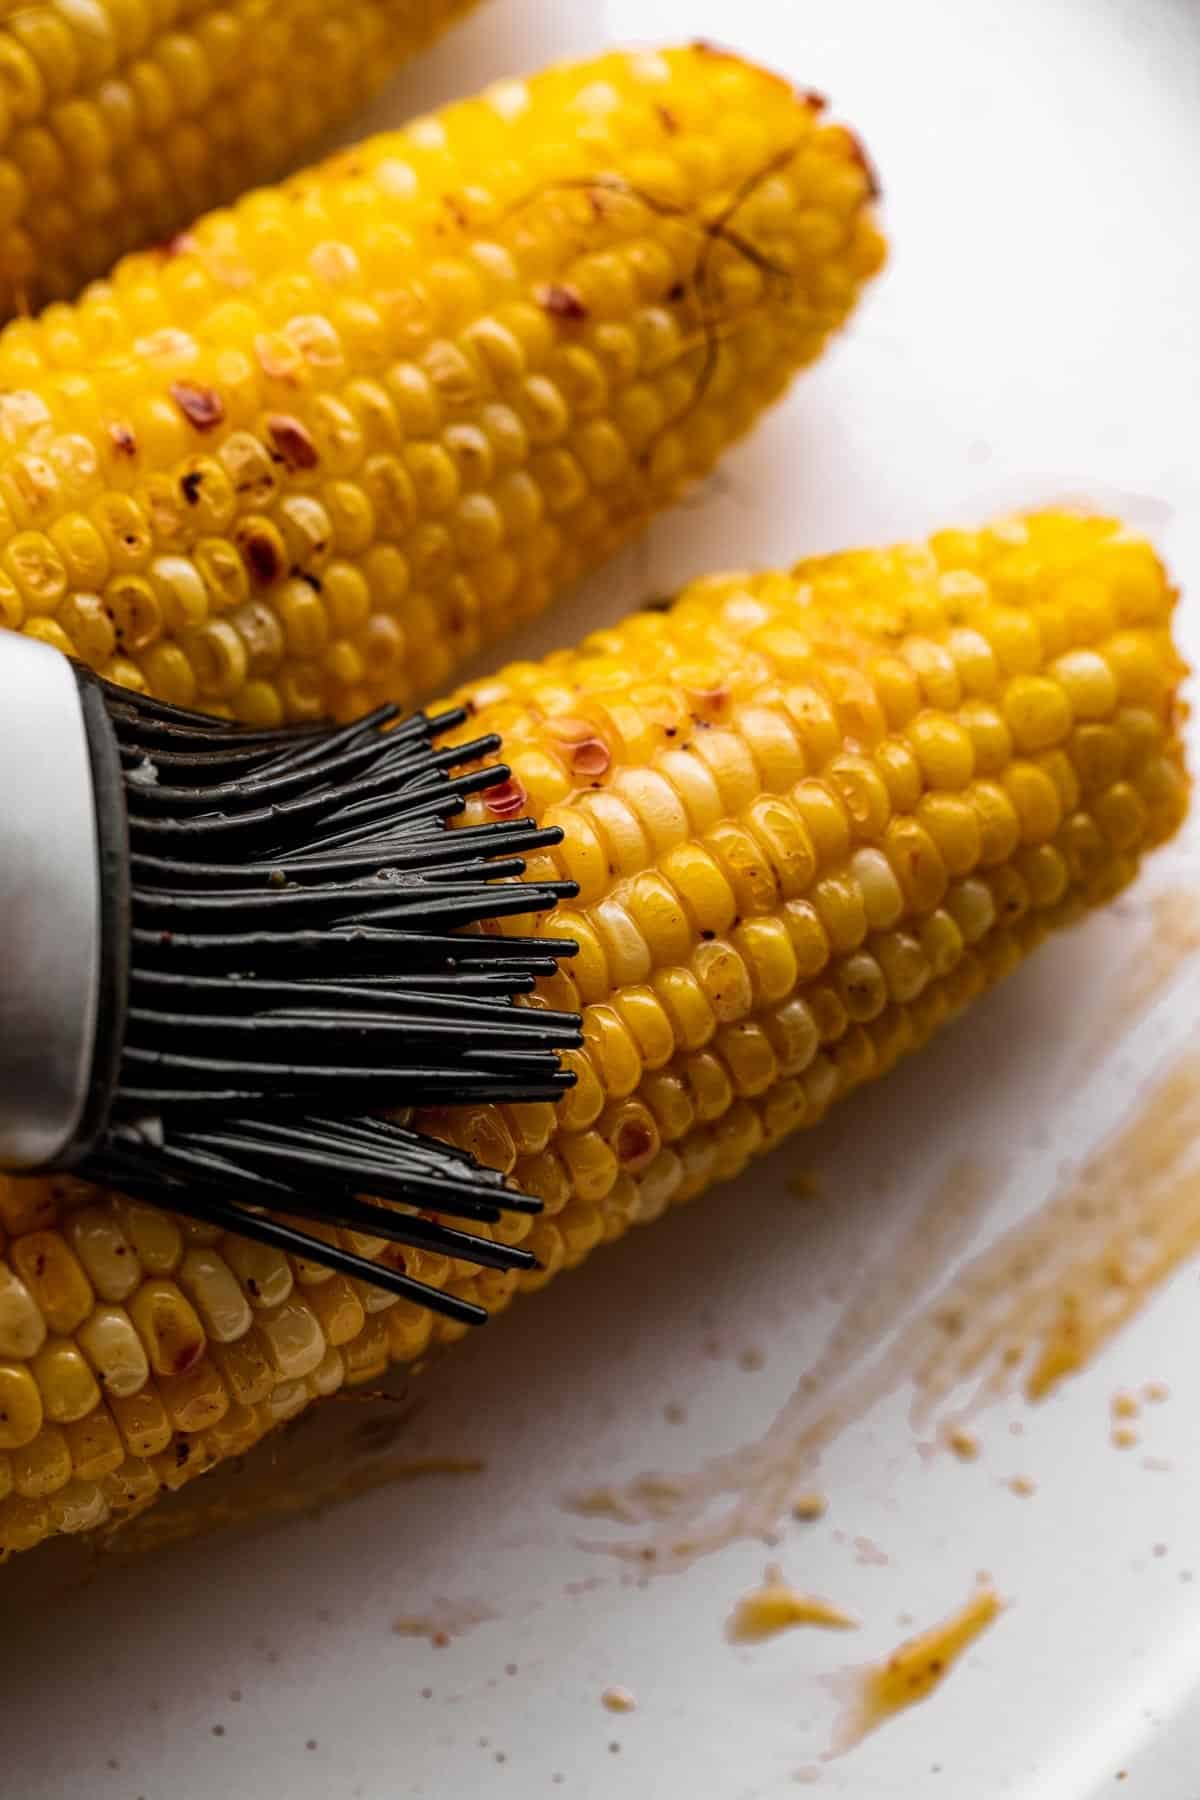 brushing a corn on the cob with butter sauce.